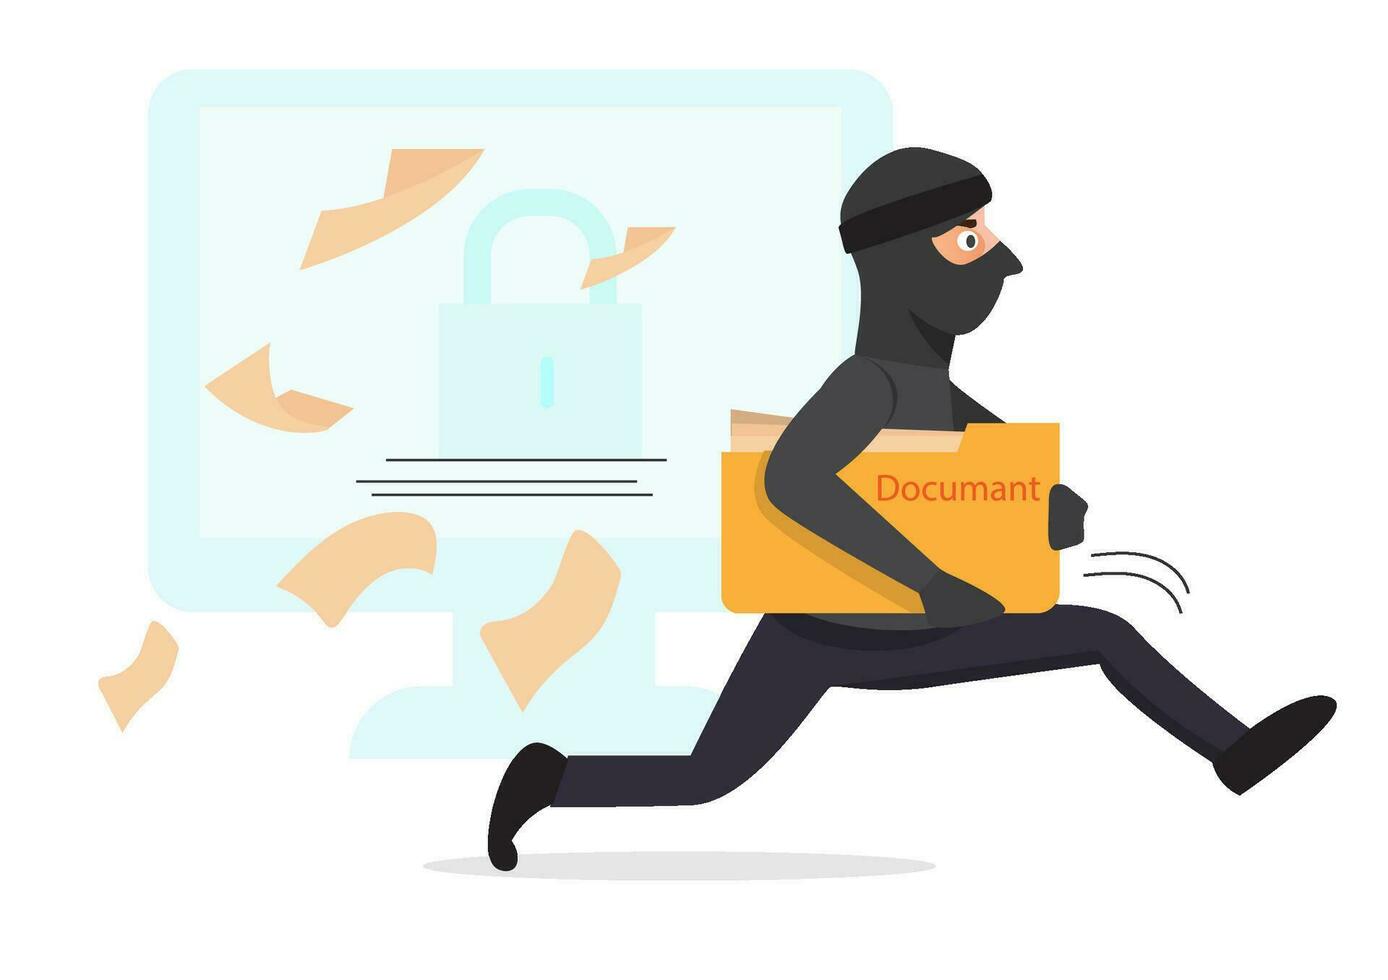 Tiny hacker running away from computer with stolen files. Monitor with unlocked data on screen, criminal holding folder with documents vector illustration. Cybersecurity, safety, internet concept